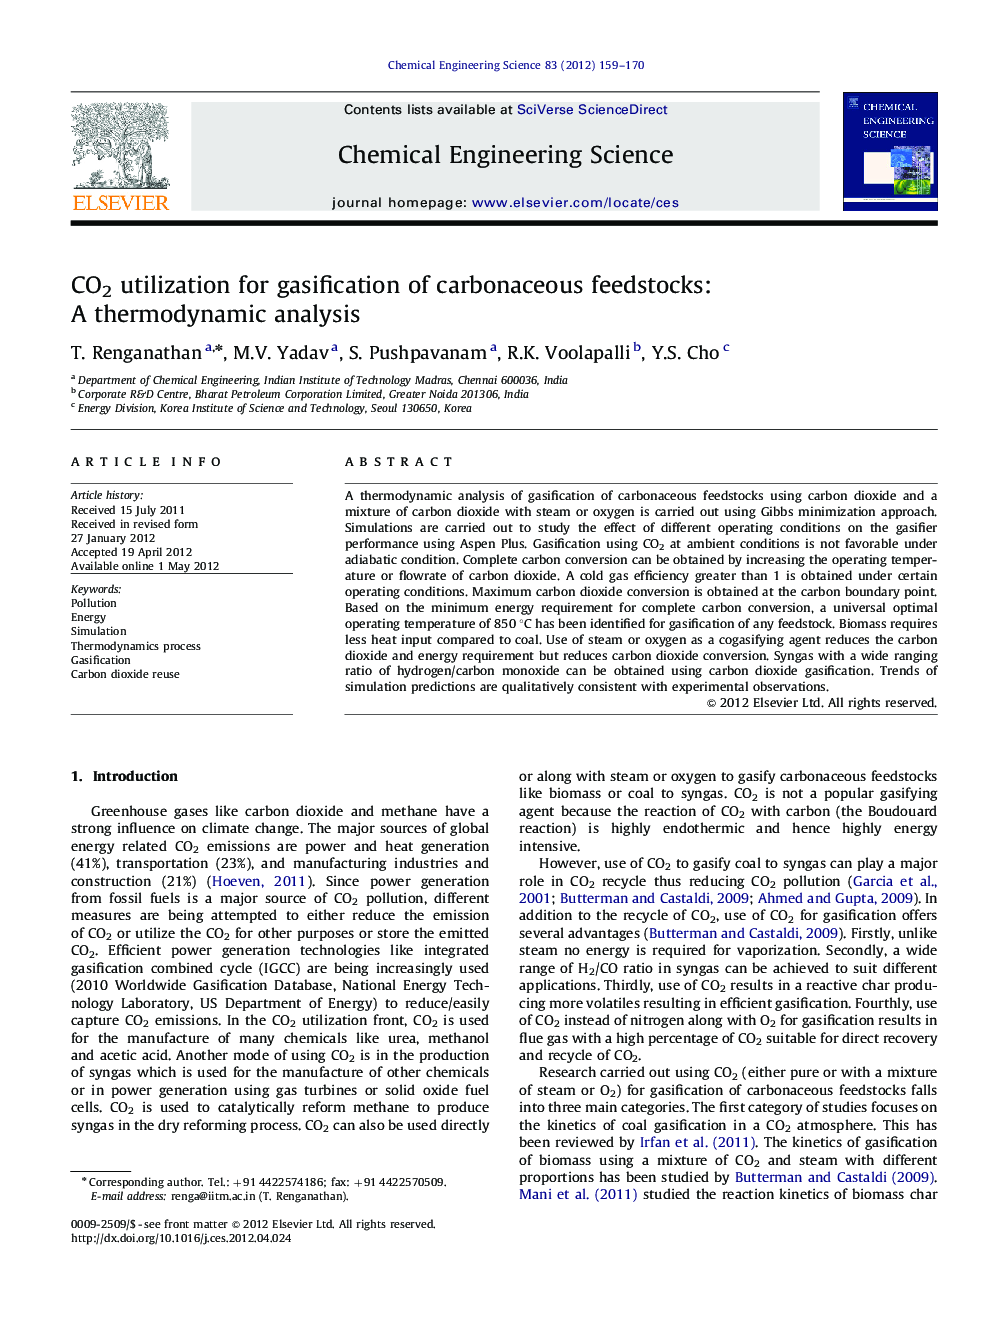 CO2 utilization for gasification of carbonaceous feedstocks: A thermodynamic analysis